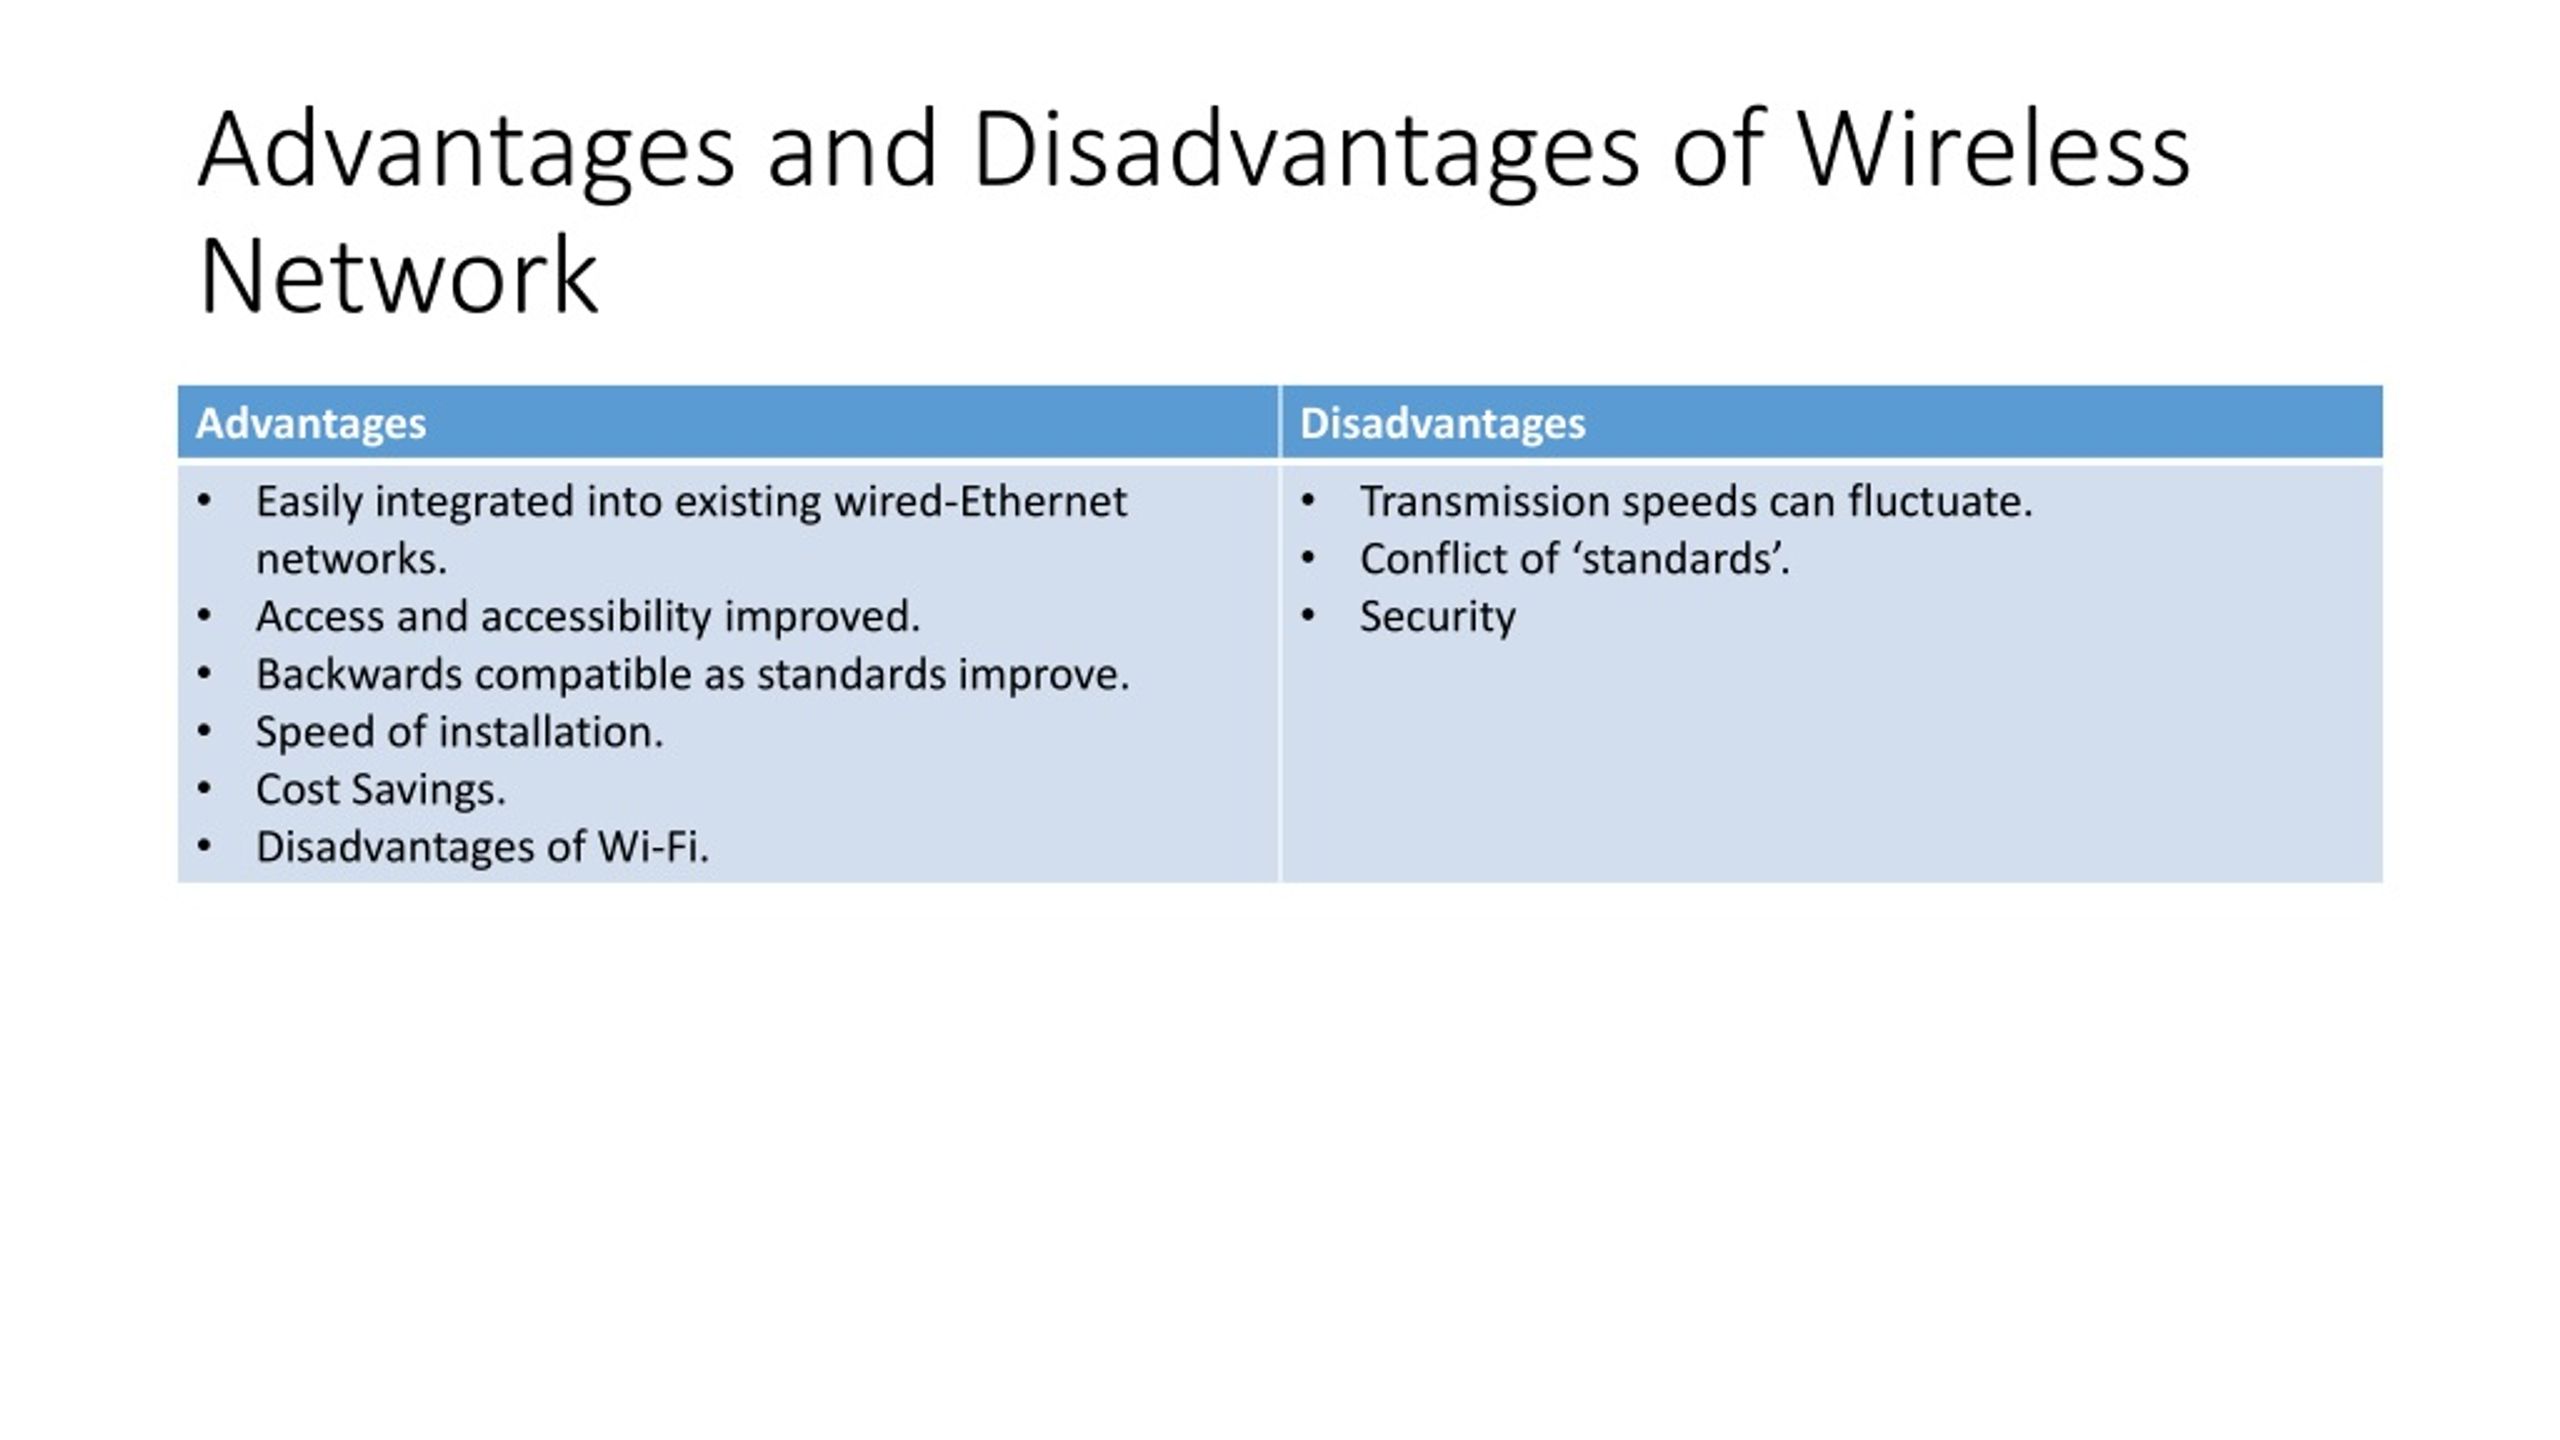 Wired vs Wireless Networks - Advantages, Disadvantages, Meaning